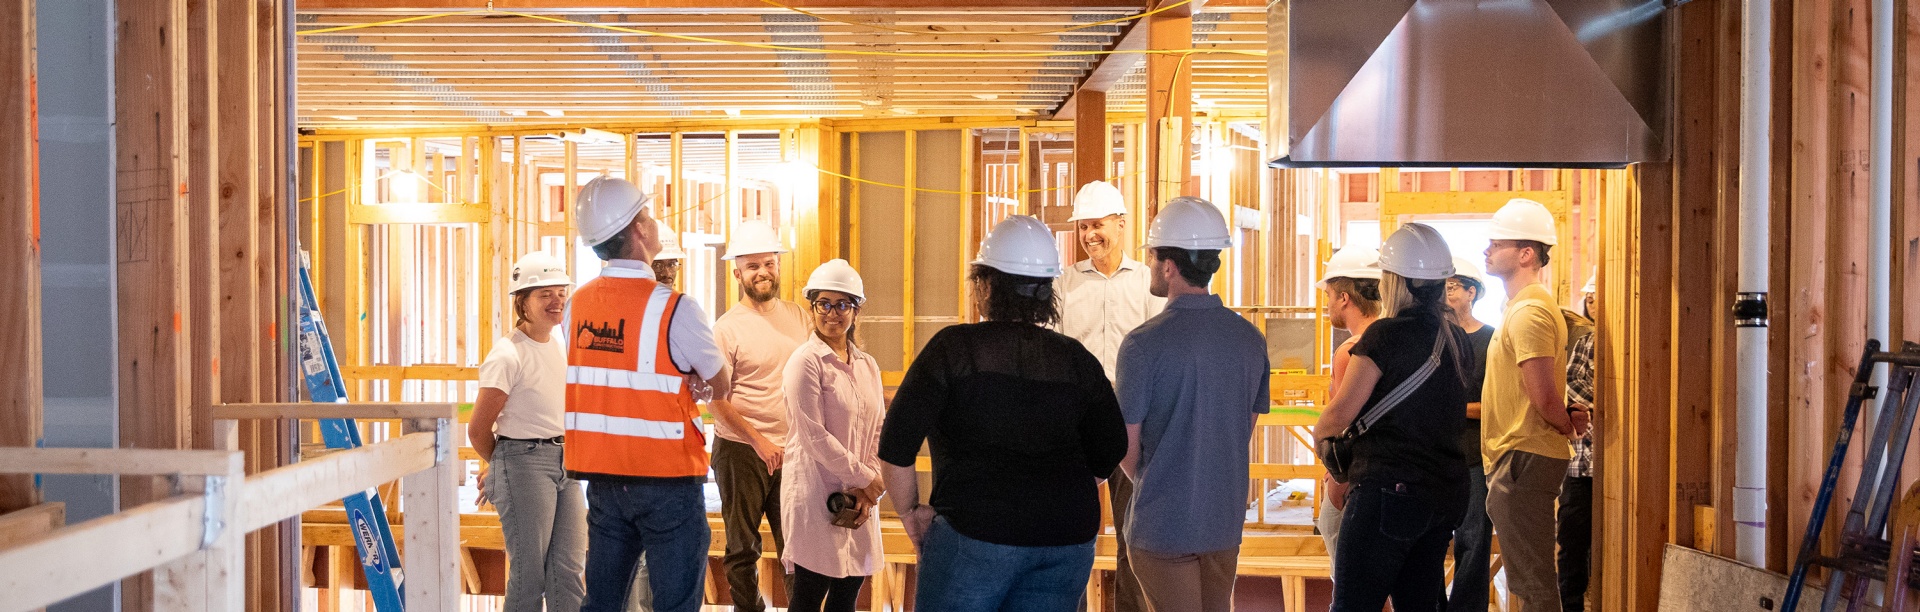 Master of Science in Real Estate Development students tour a buildnig under construction. 